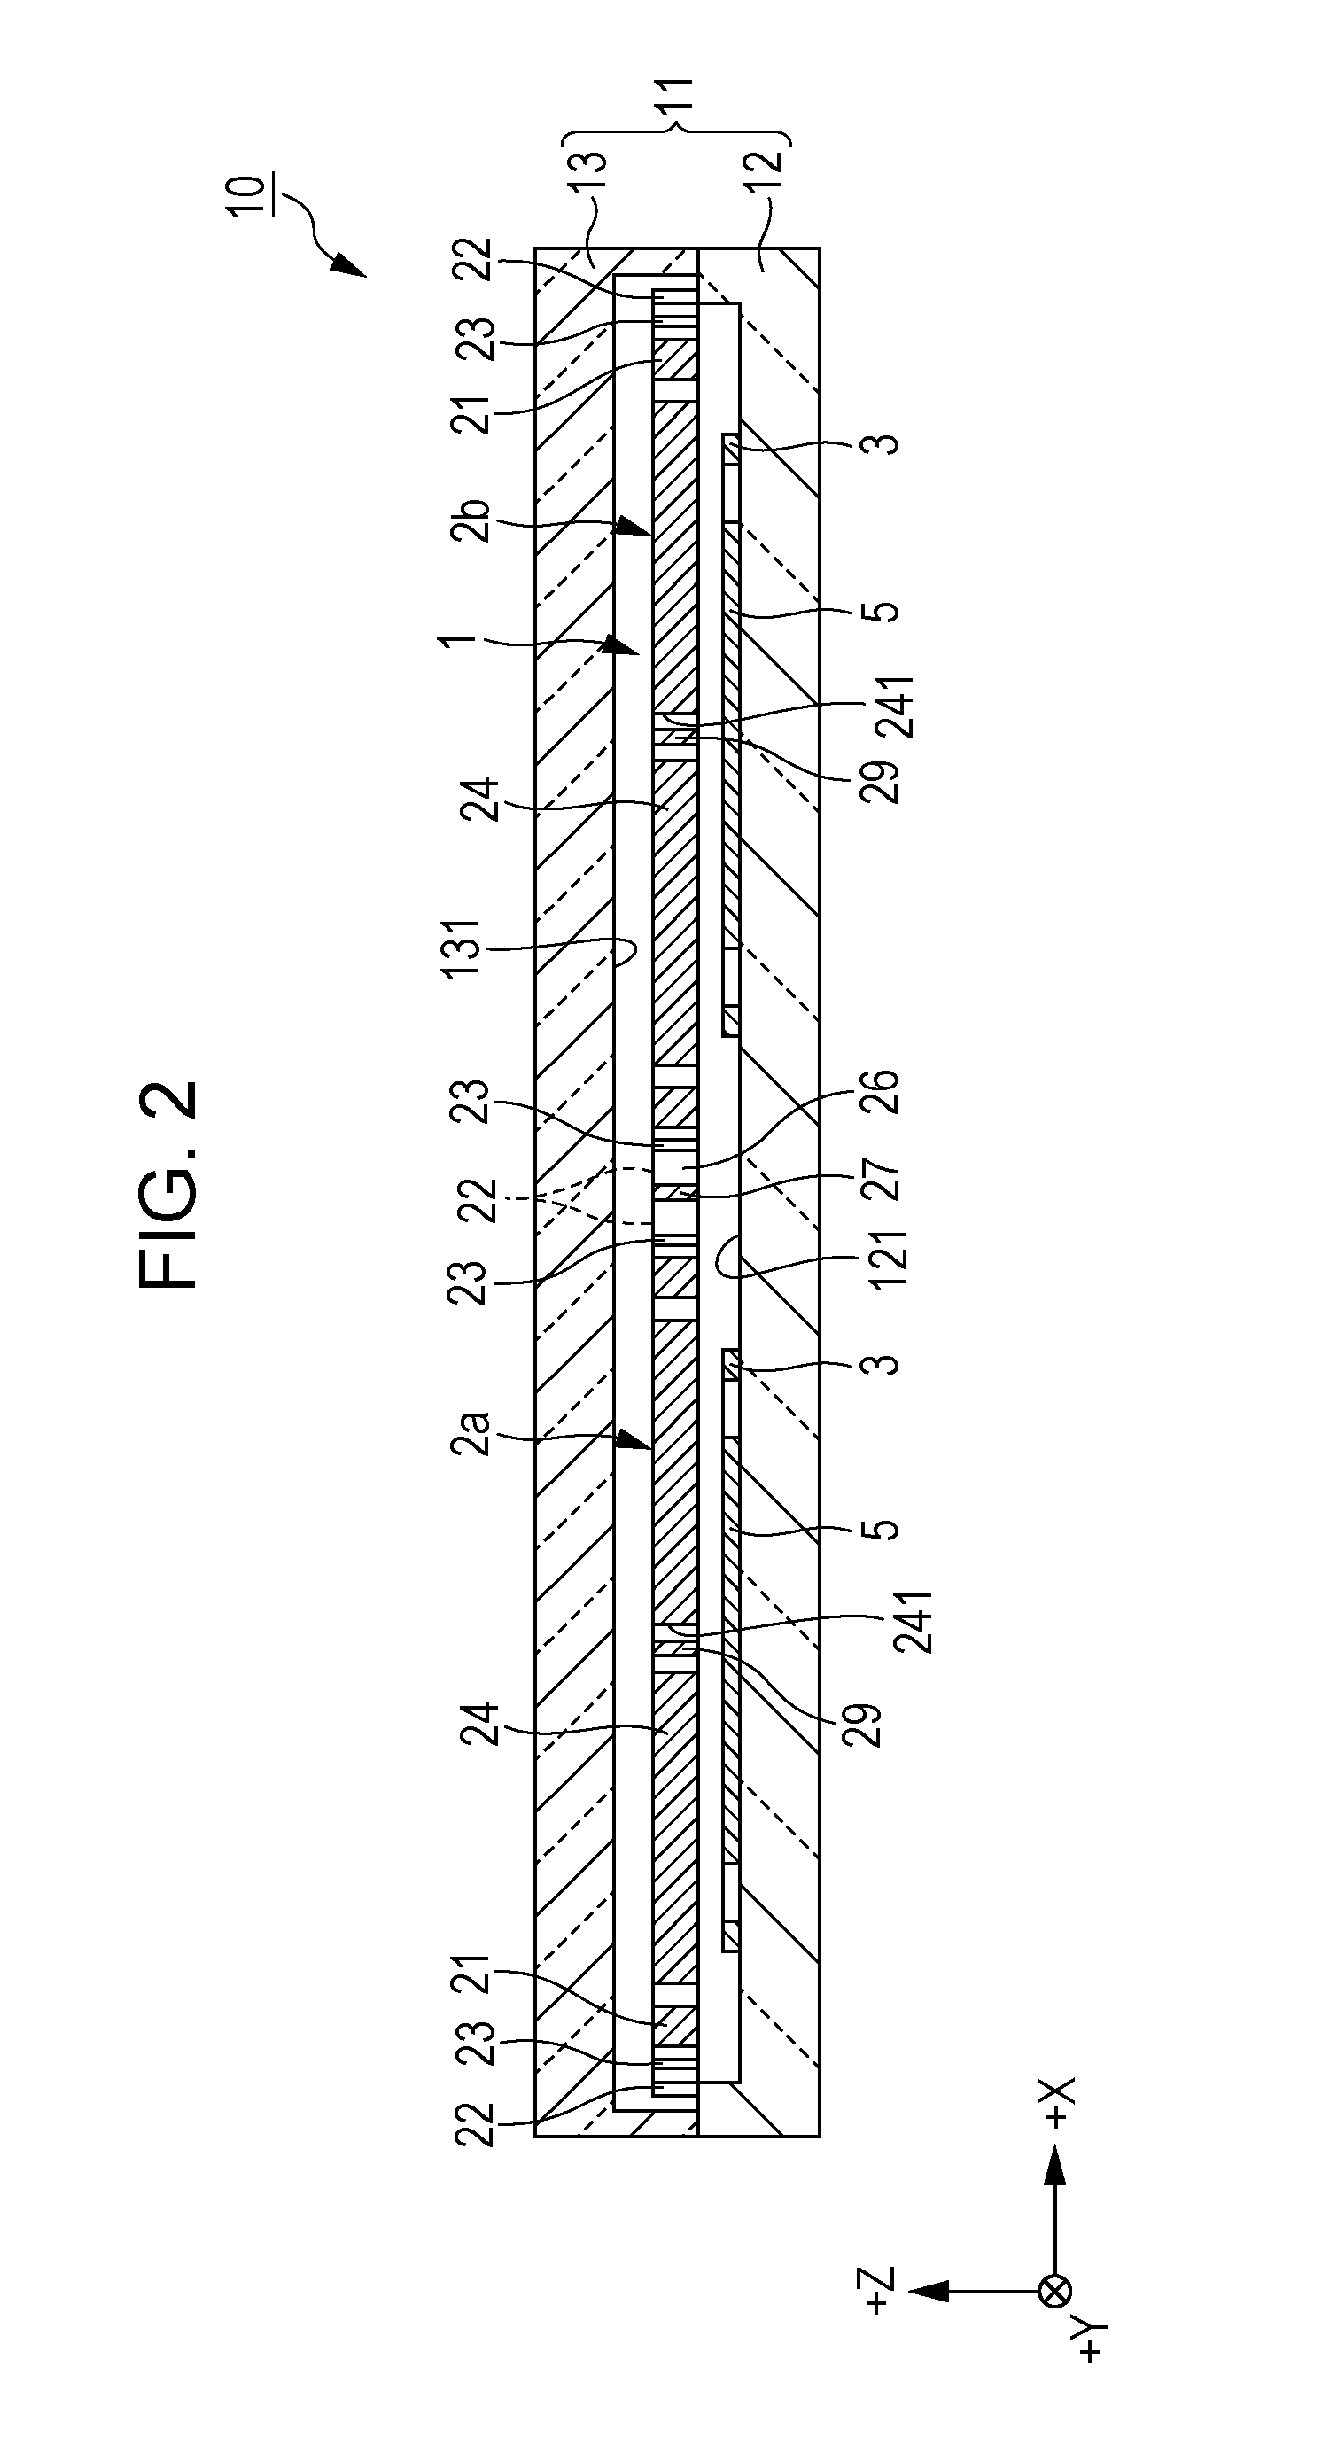 Physical quantity sensor element, physical quantity sensor, electronic equipment, and movable body